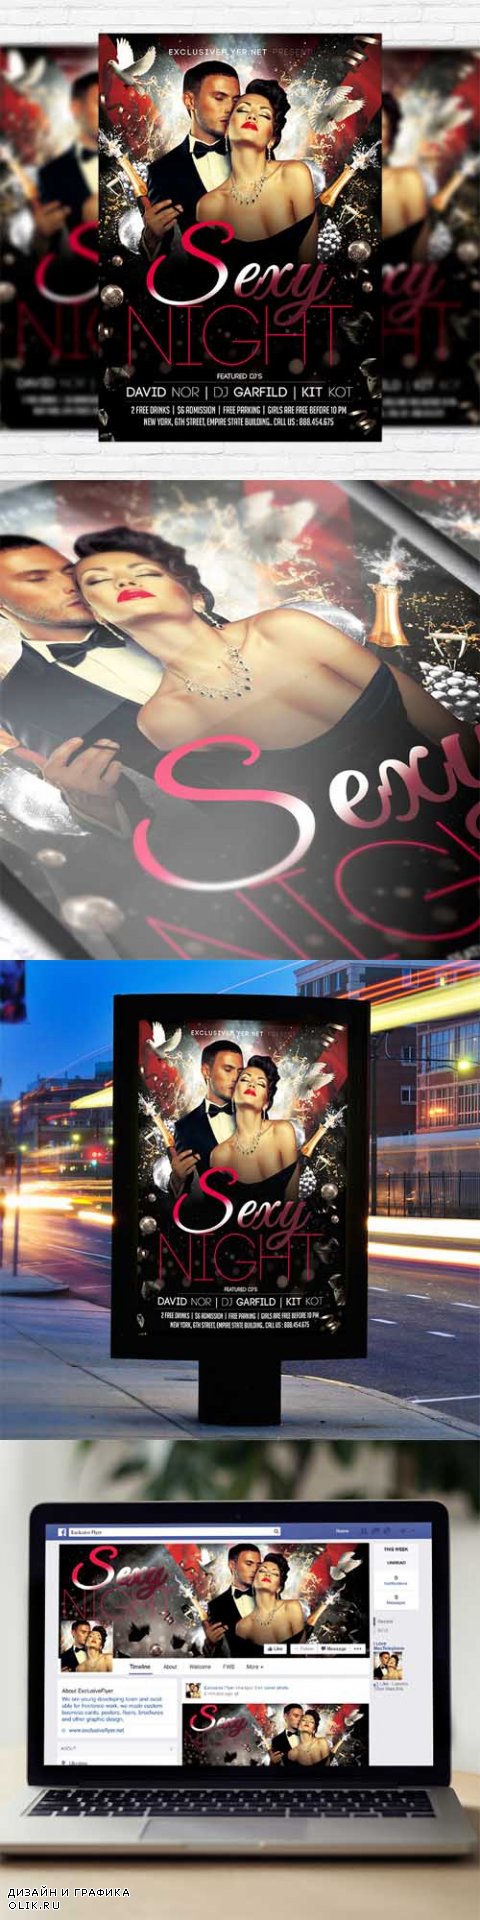 Flyer Template - Sexy Night Vol.2 + Facebook Cover